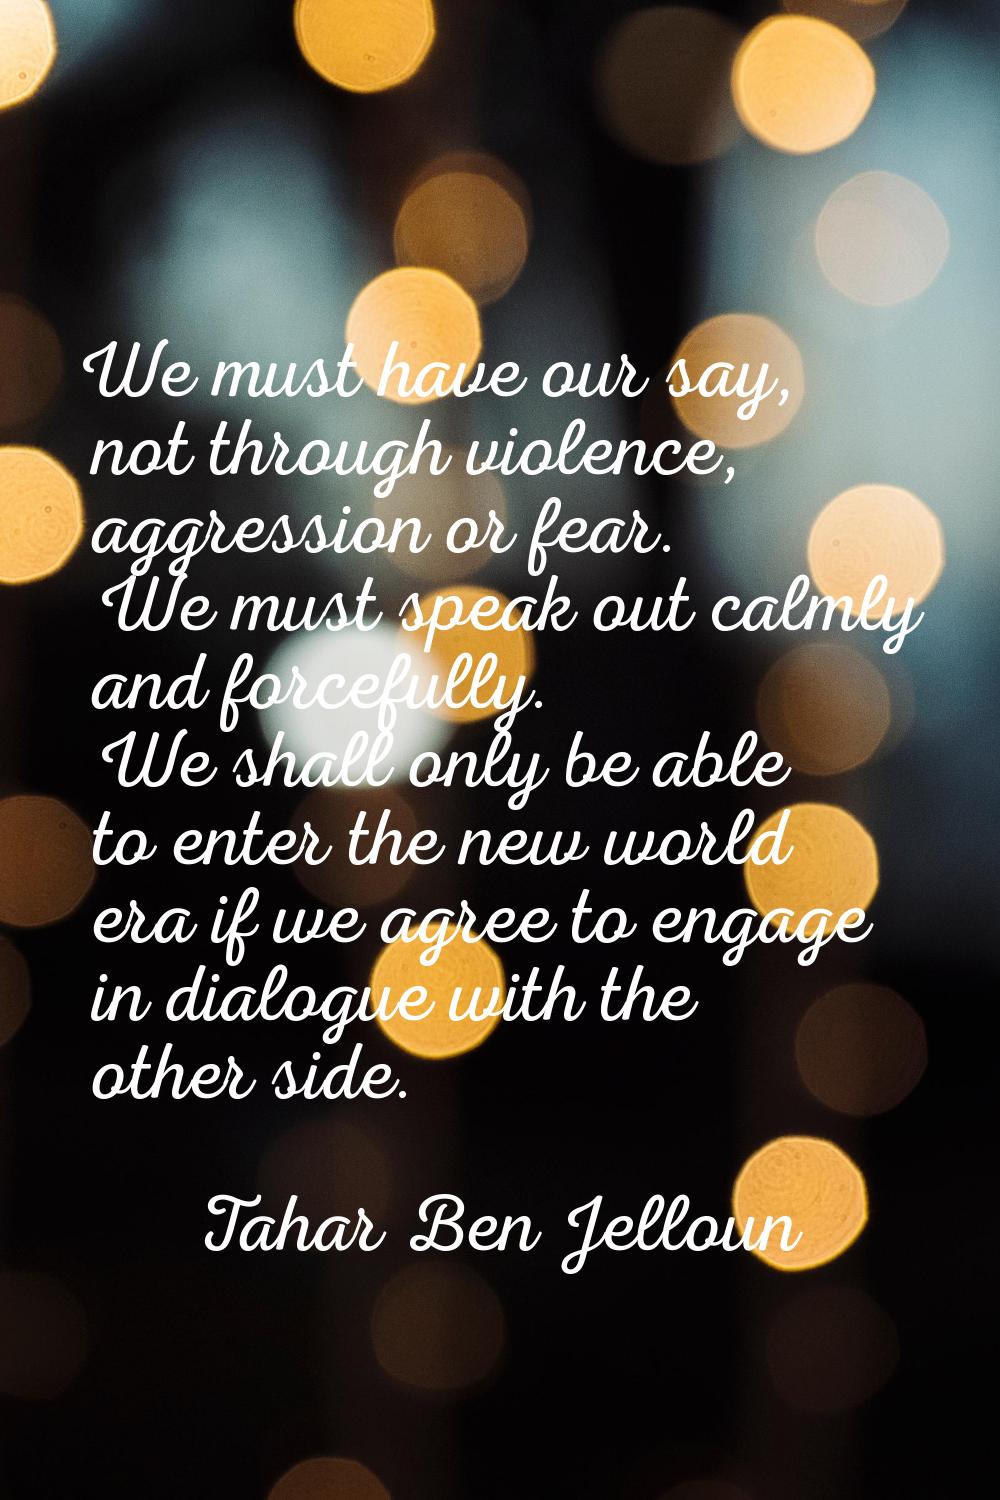 We must have our say, not through violence, aggression or fear. We must speak out calmly and forcef